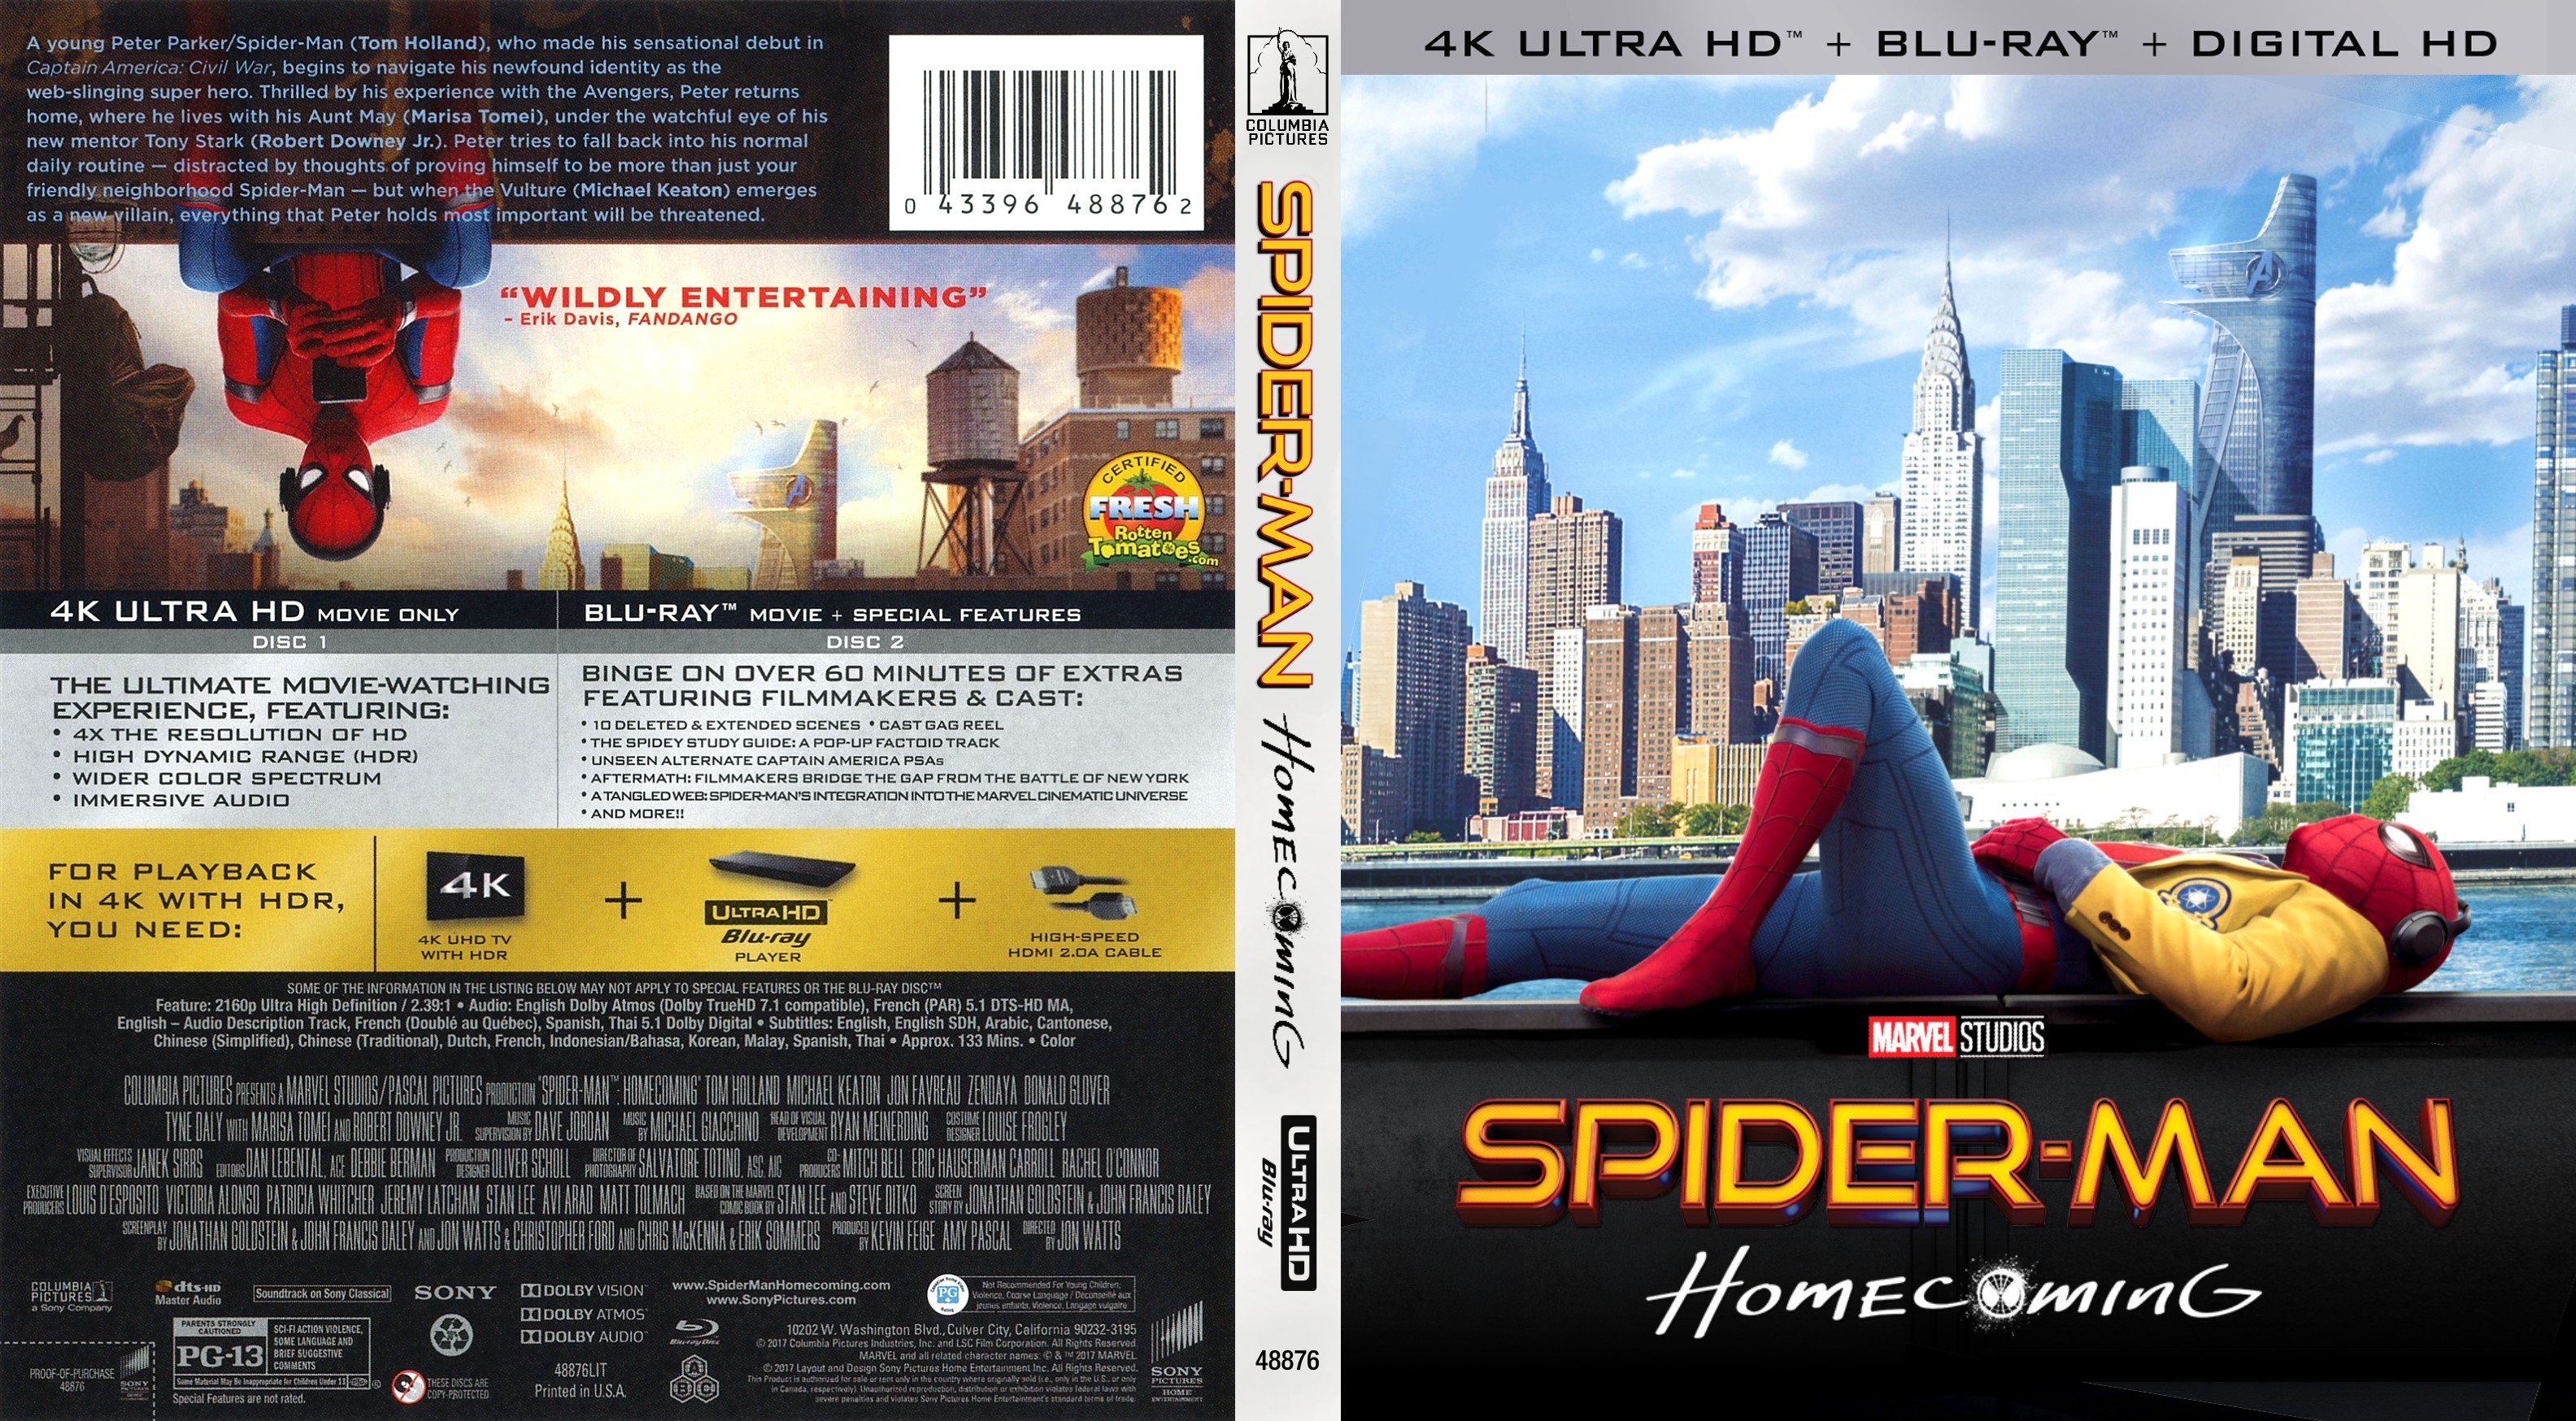 Spider-Man: Homecoming 4k Bluray Cover.